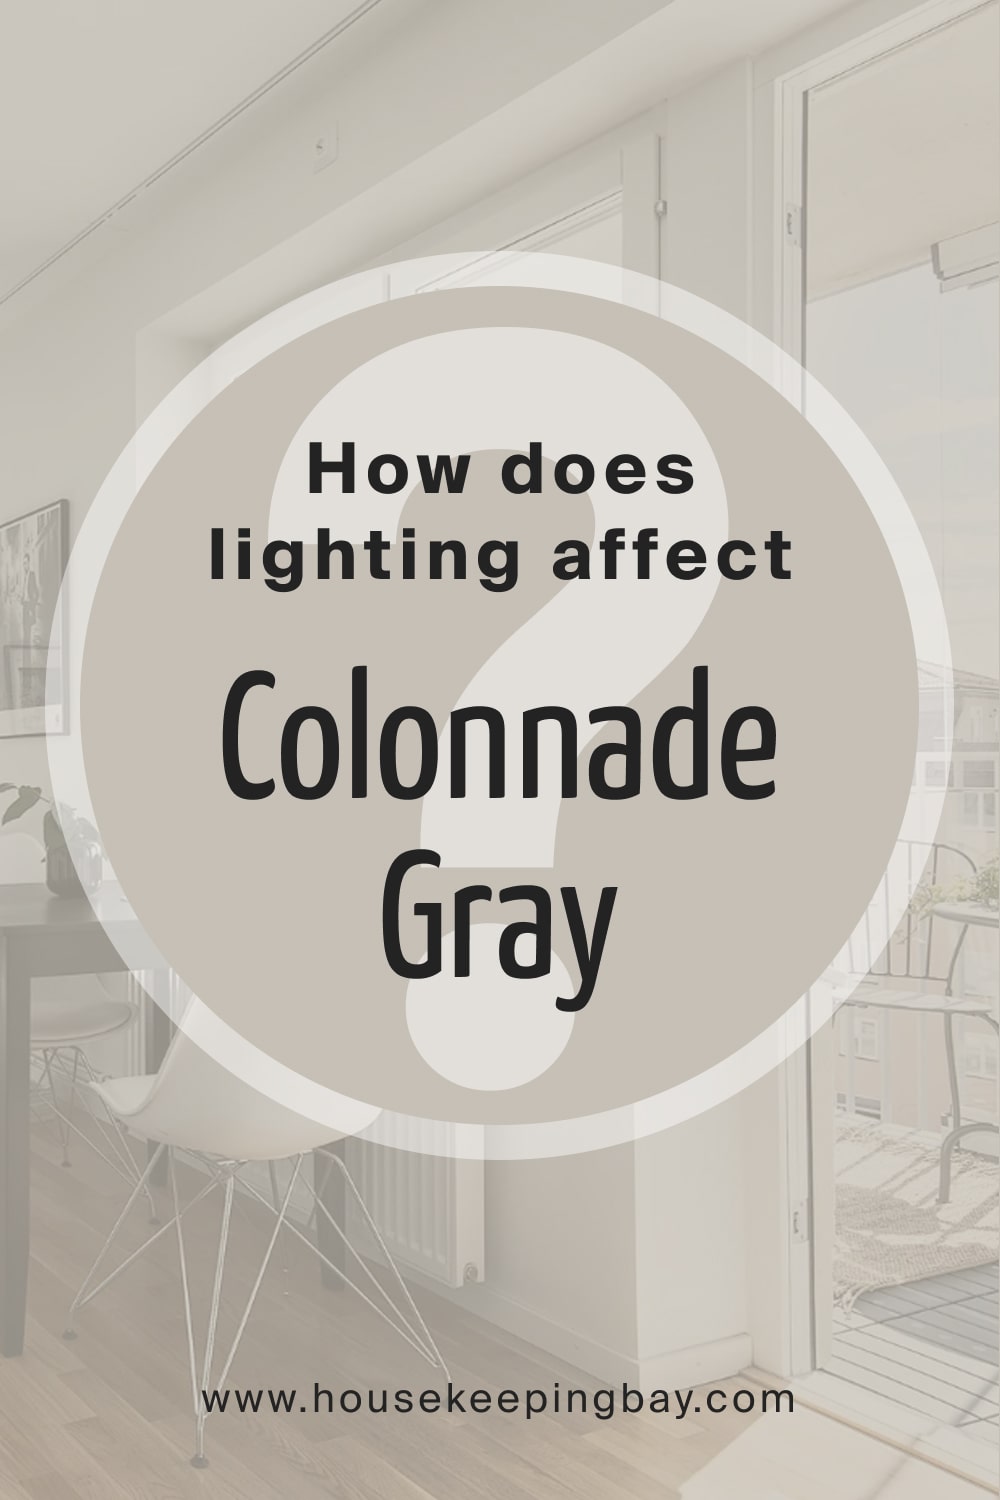 How Does Lighting Affect Colonnade Gray